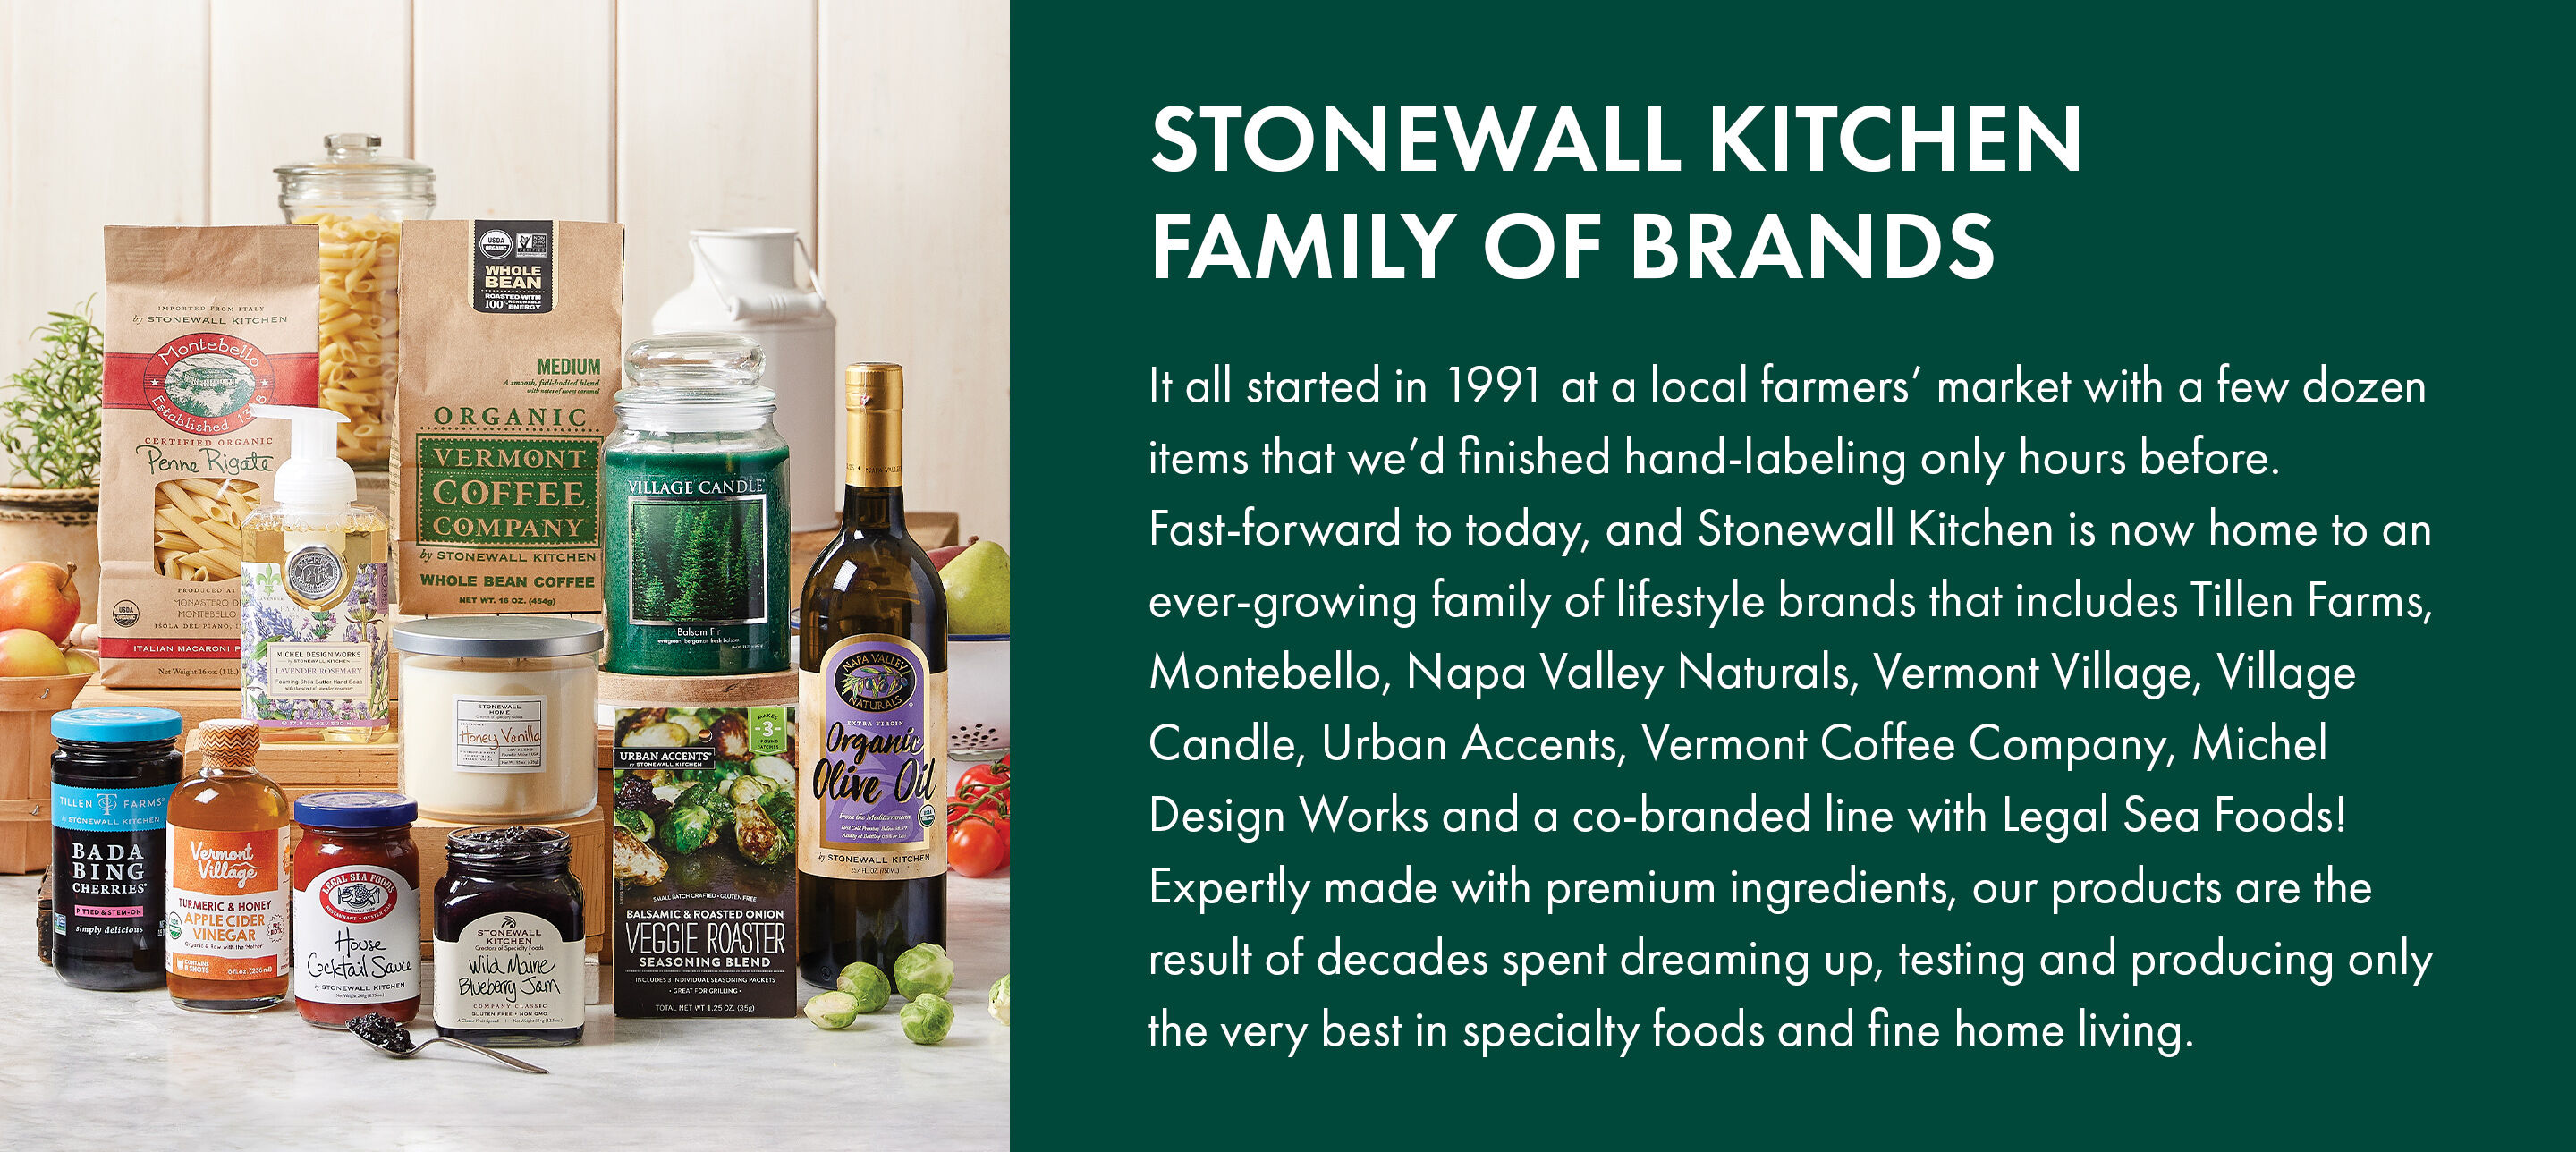 Stonewall Kitchen Family of Brands | It all started in 1991 at a local farmers’ market with a few dozen items that we’d finished hand-labeling only hours before. Fast-forward to today, and Stonewall Kitchen is now home to an ever-growing family of lifestyle brands that includes Tillen Farms, Montebello, Napa Valley Naturals, Vermont Village, Village Candle, Urban Accents, Vermont Coffee Company, Michel Design Works and a co-branded line with Legal Sea Foods! Expertly made with premium ingredients, our products are the result of decades spent dreaming up, testing and producing only the very best in specialty foods and fine home living.